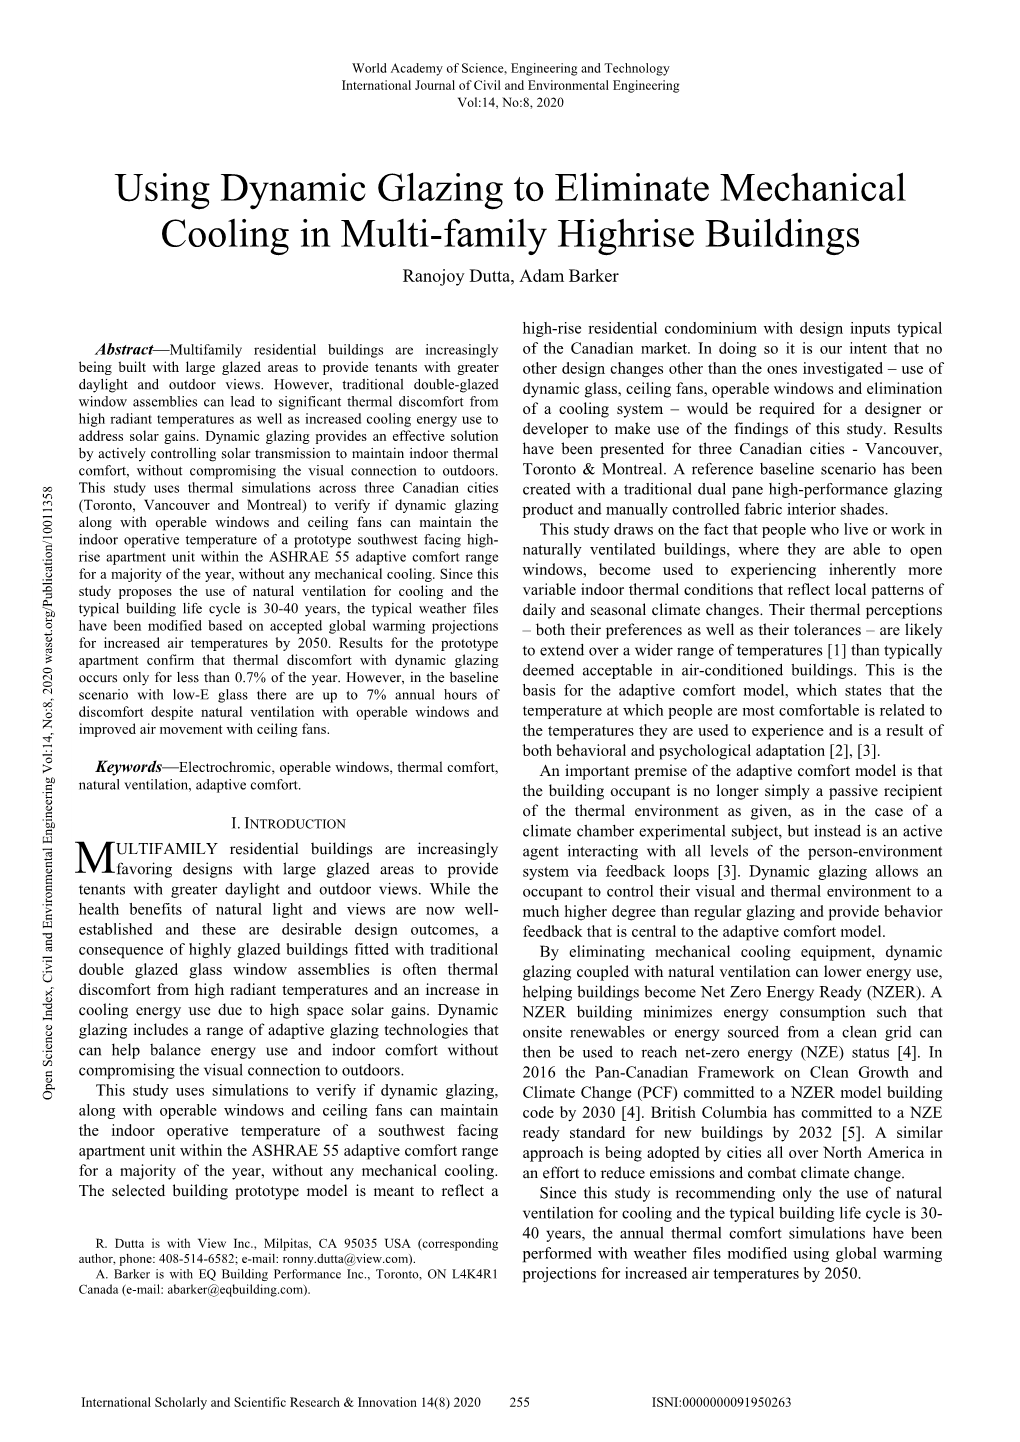 Using Dynamic Glazing to Eliminate Mechanical Cooling in Multi-Family Highrise Buildings Ranojoy Dutta, Adam Barker